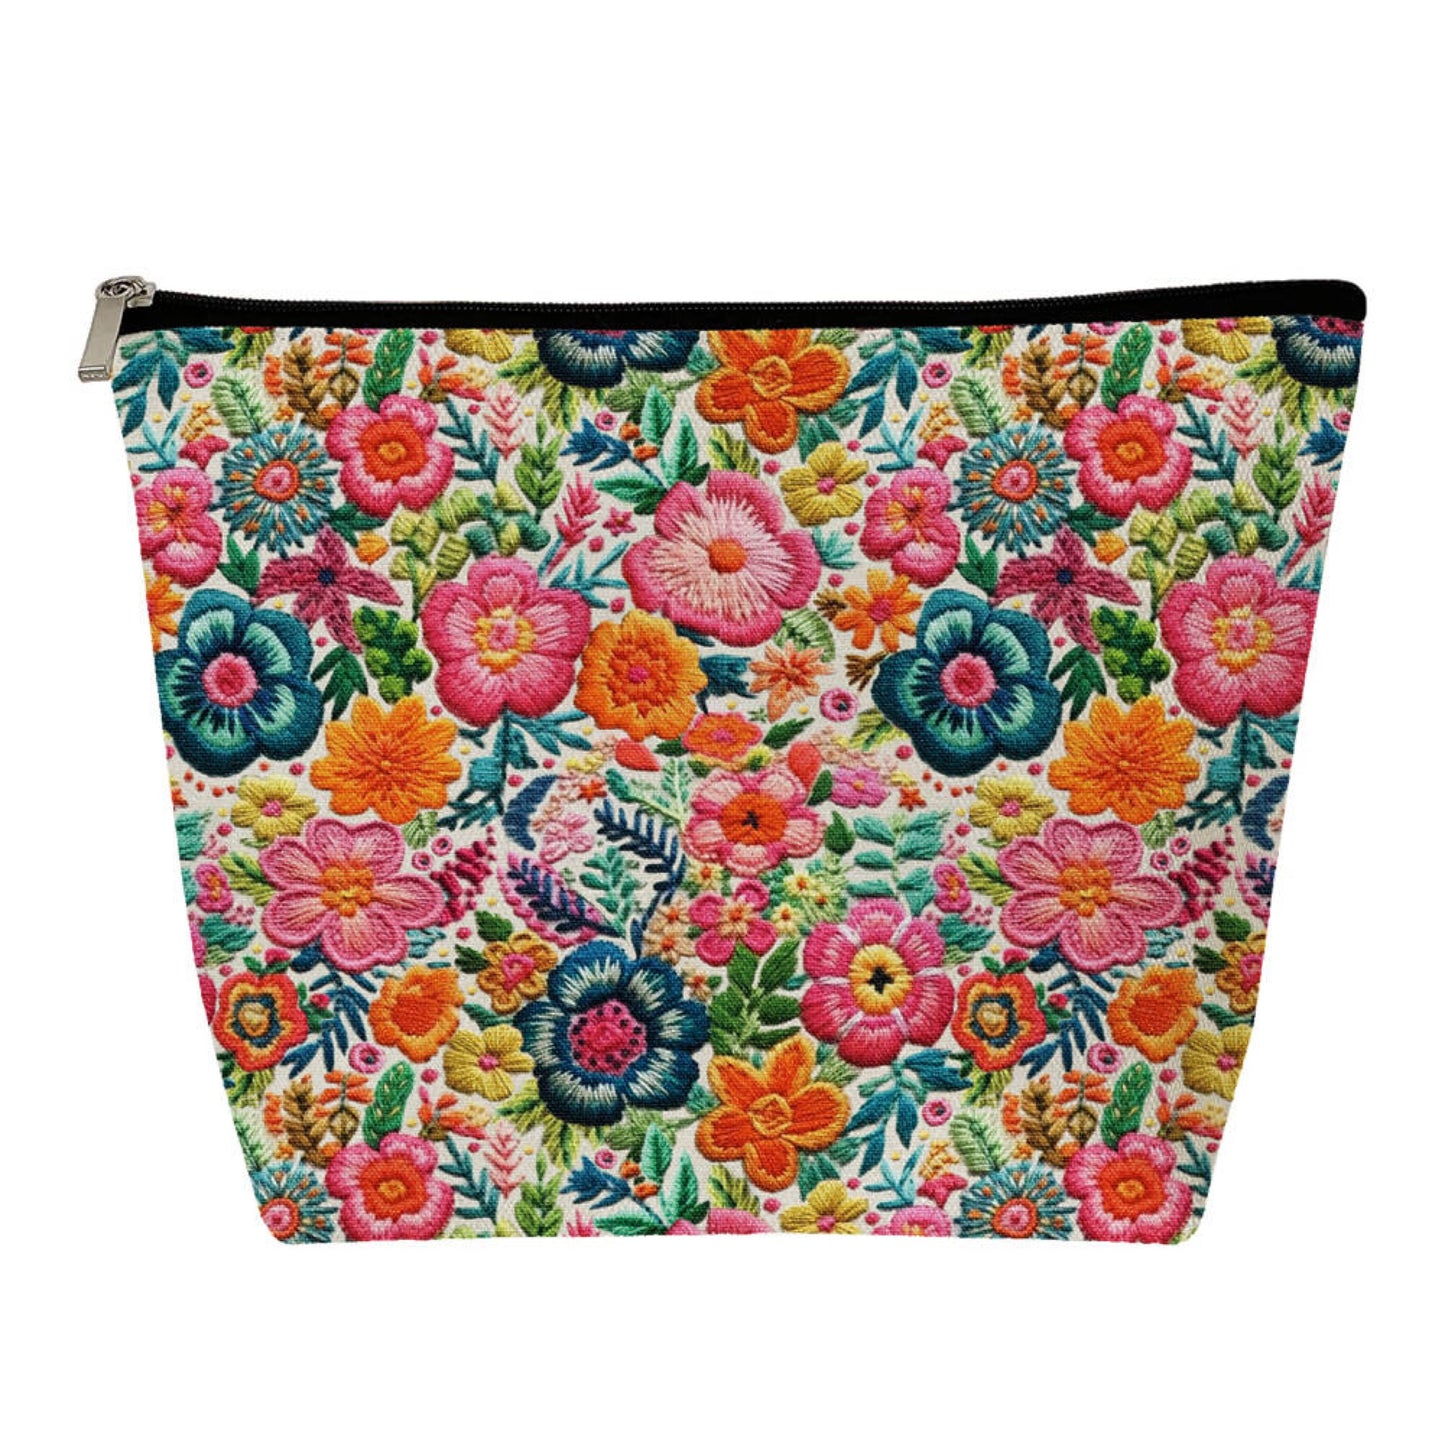 Pouch XL - Floral Colorful Embroidery